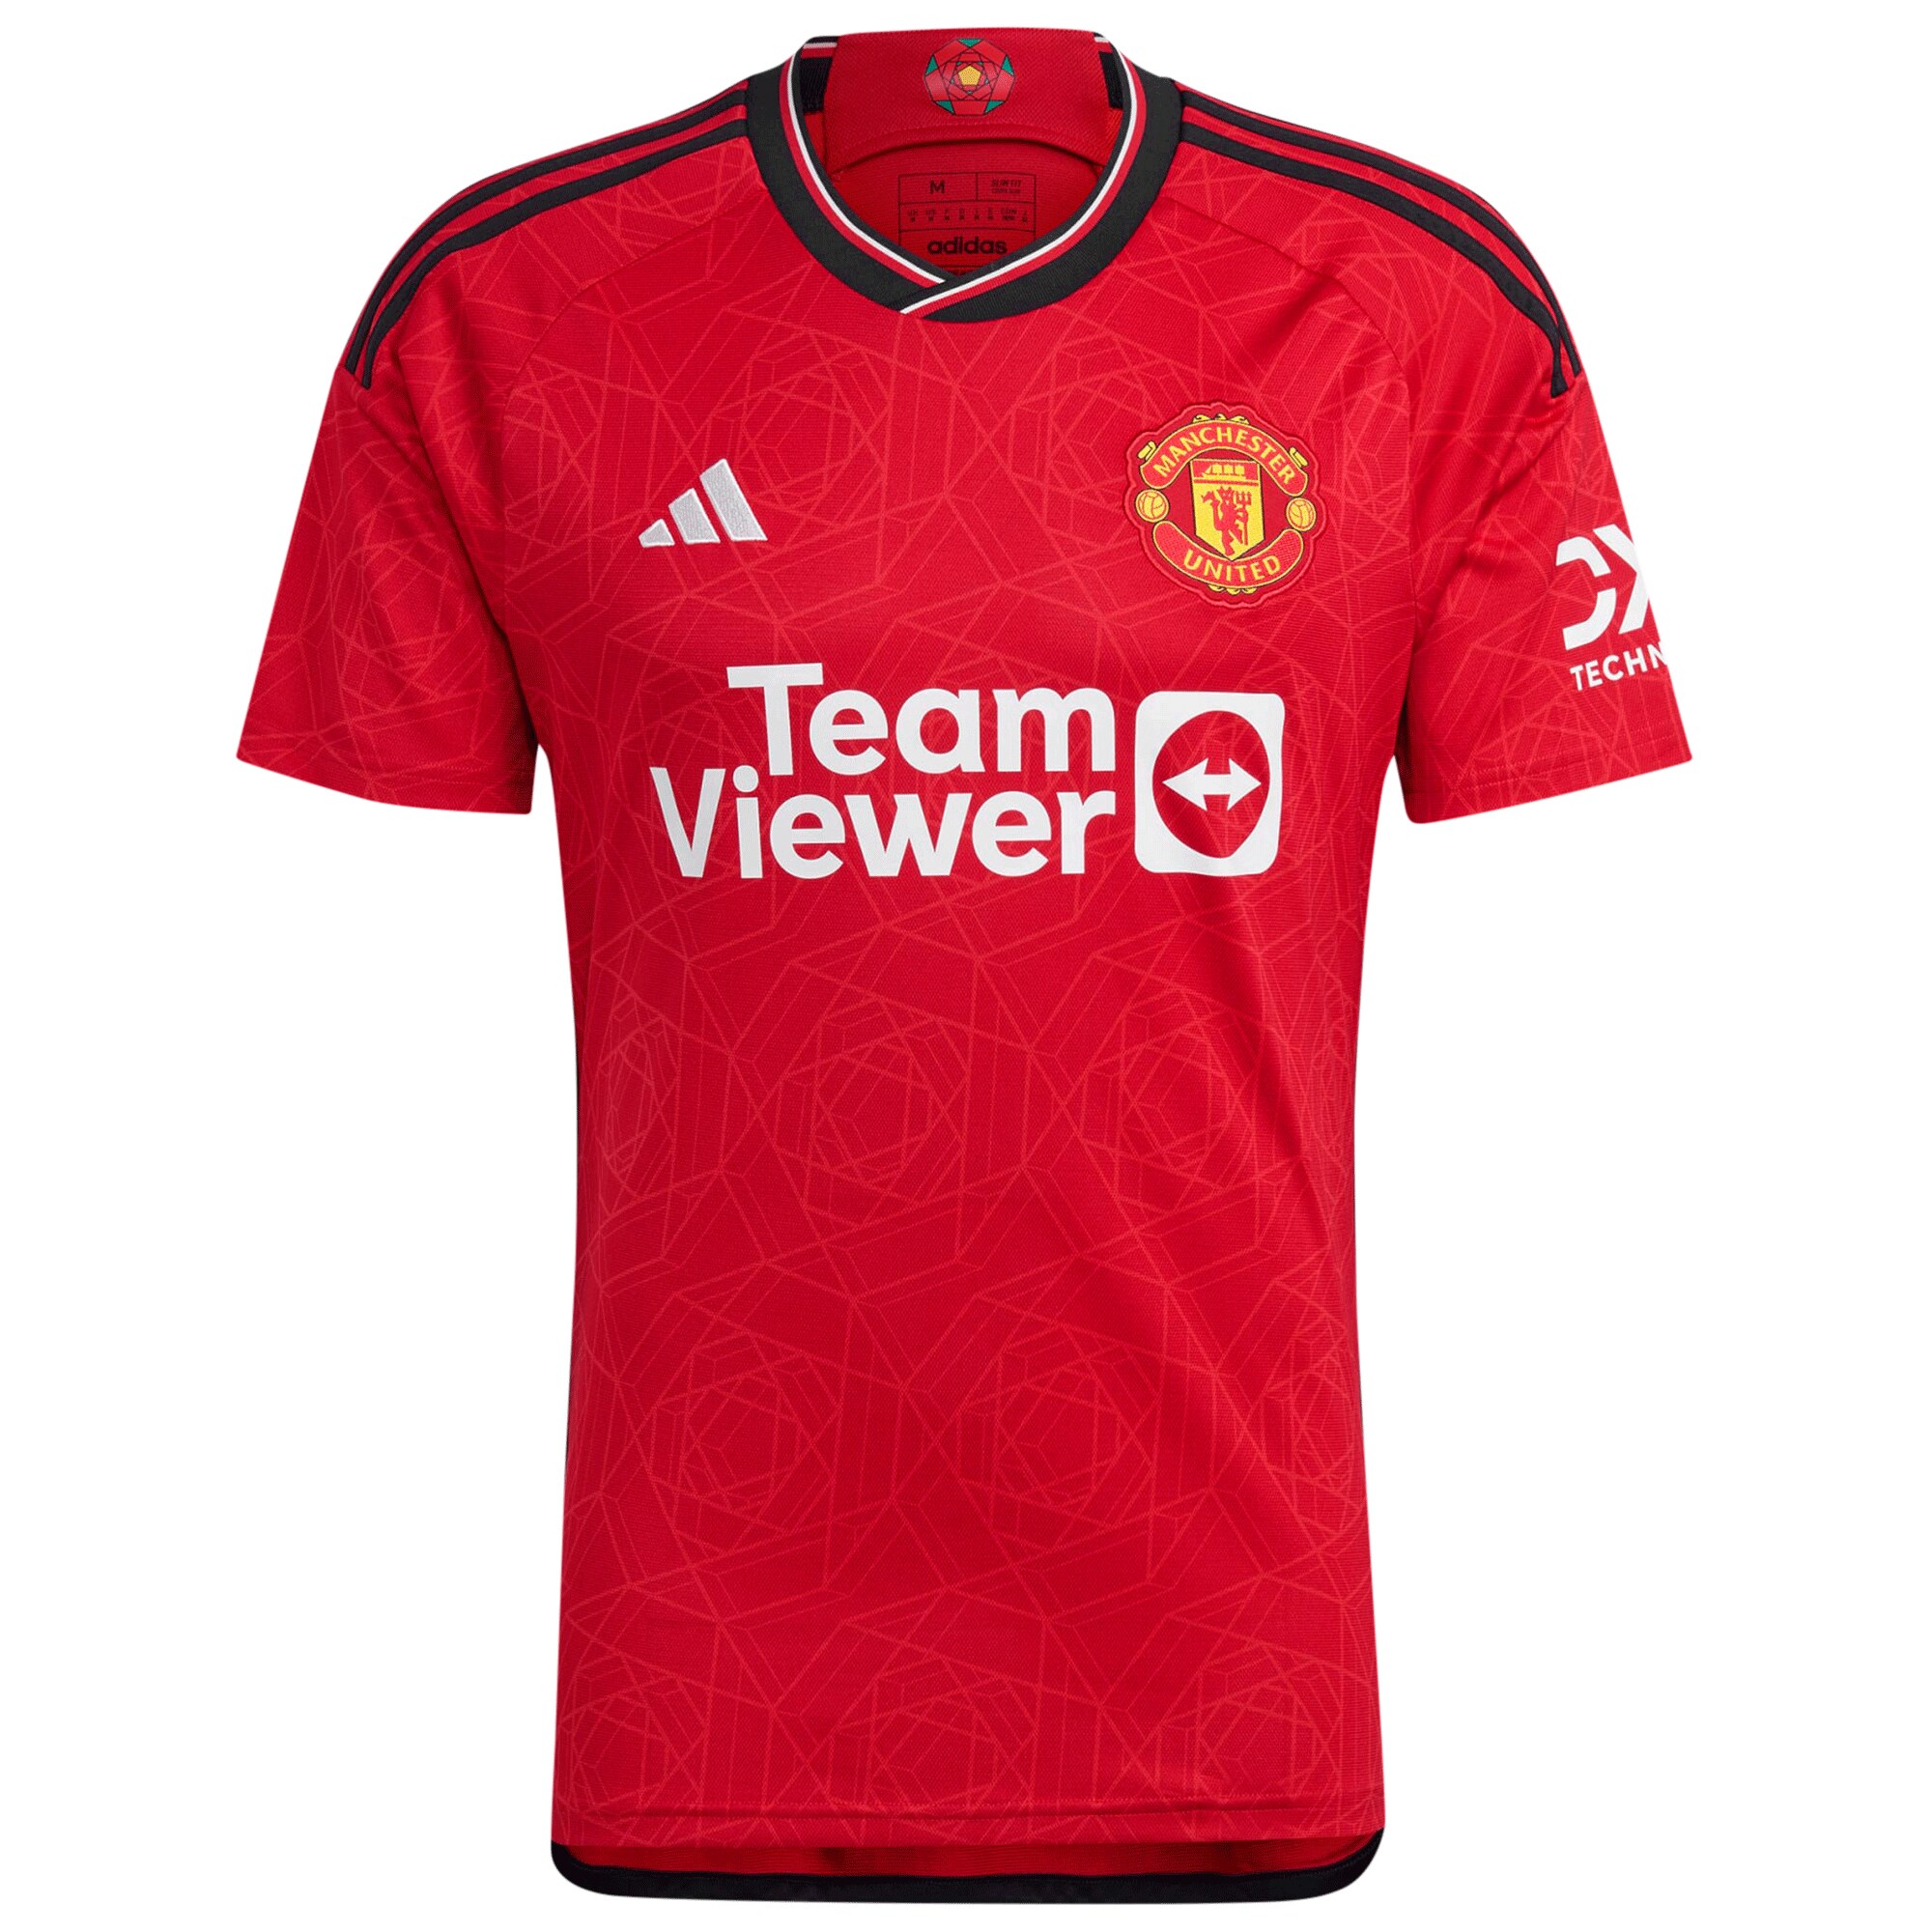 Manchester United Cup Home Shirt 2023-24 with Reguilón 15 printing